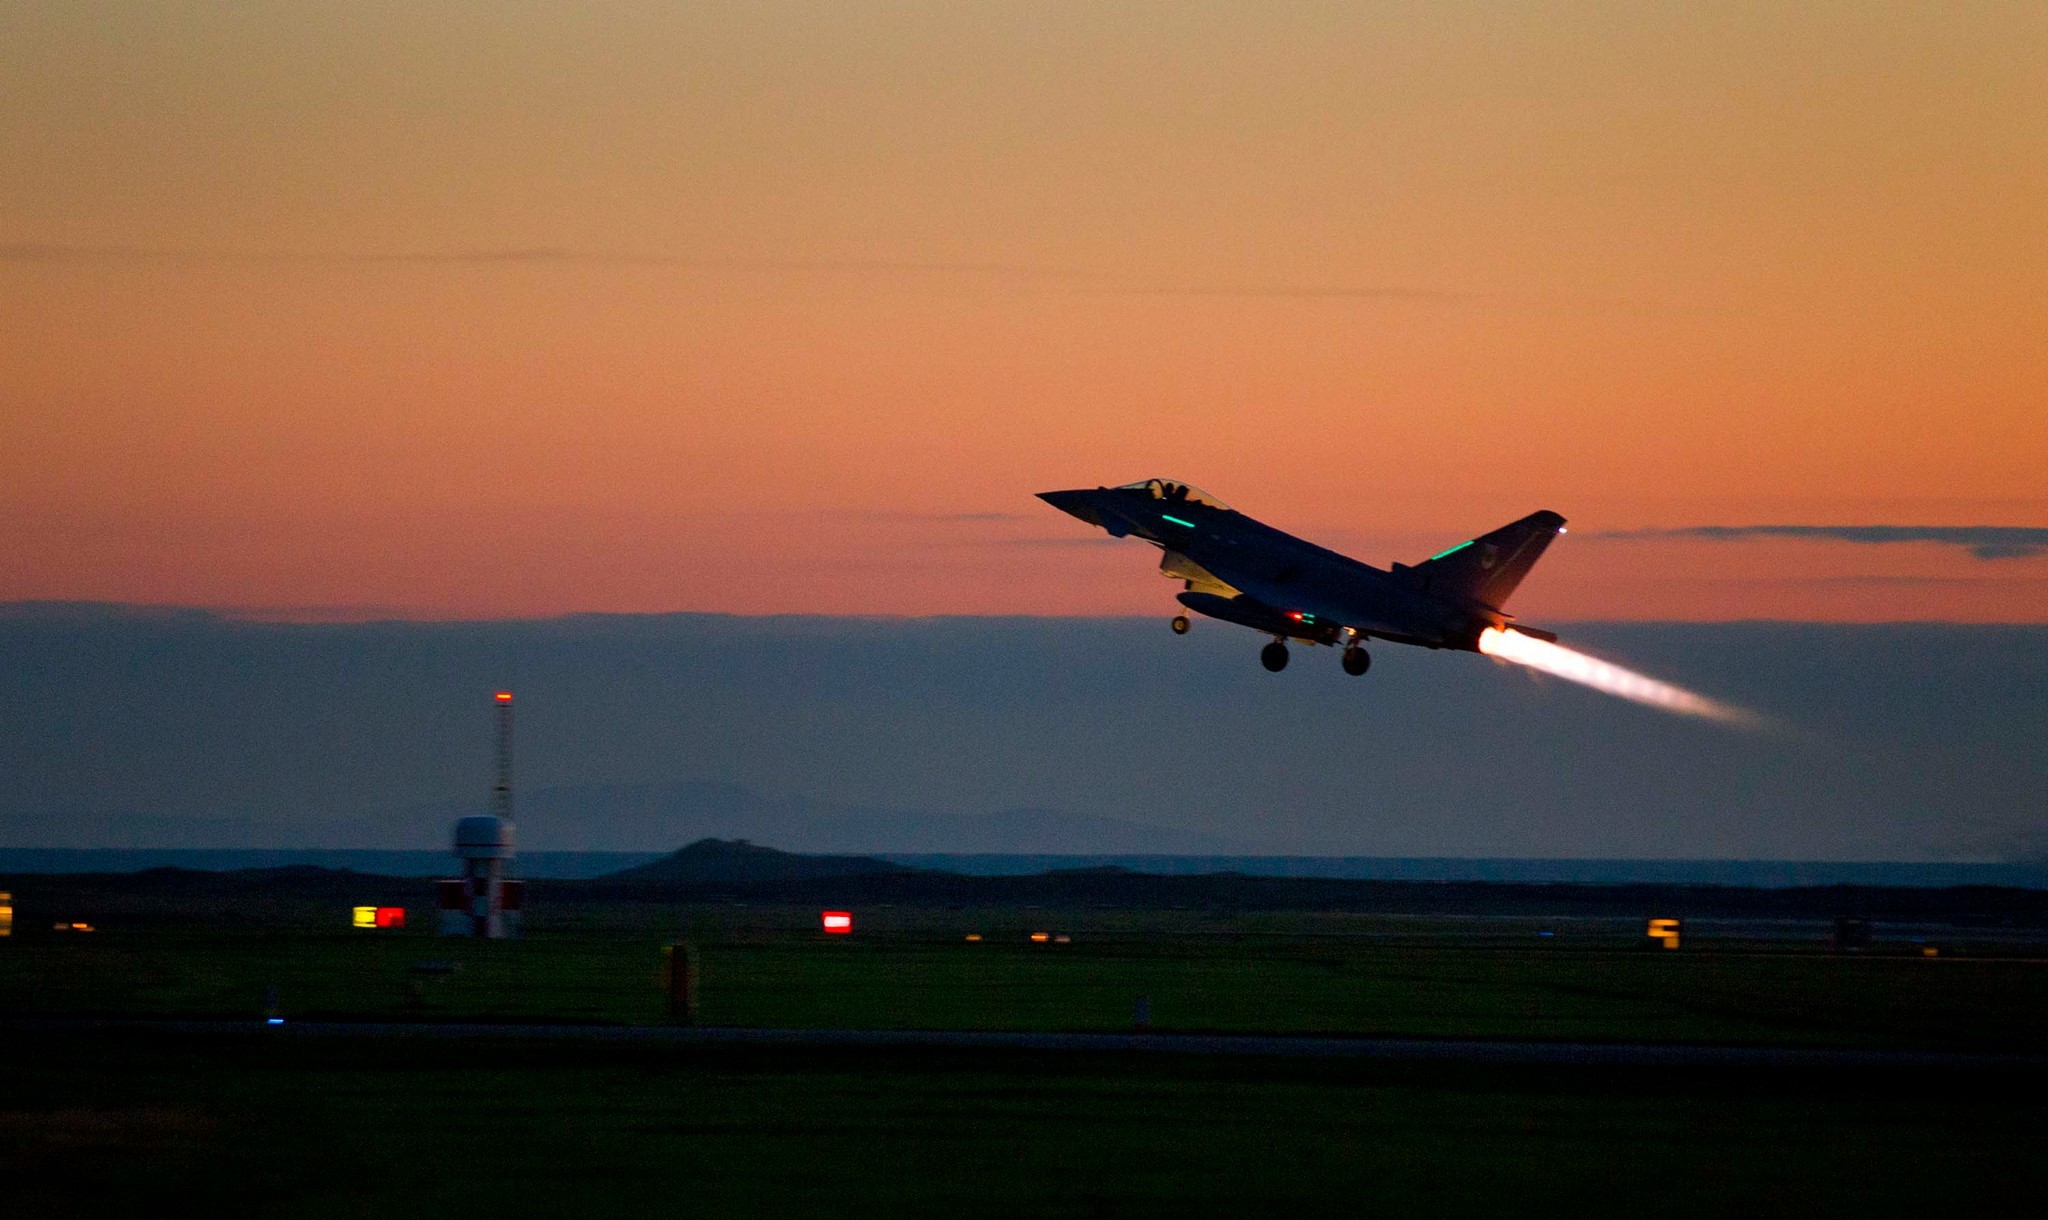 Typhoon and Tornado jets from the Moray airbase will conduct a series of drills